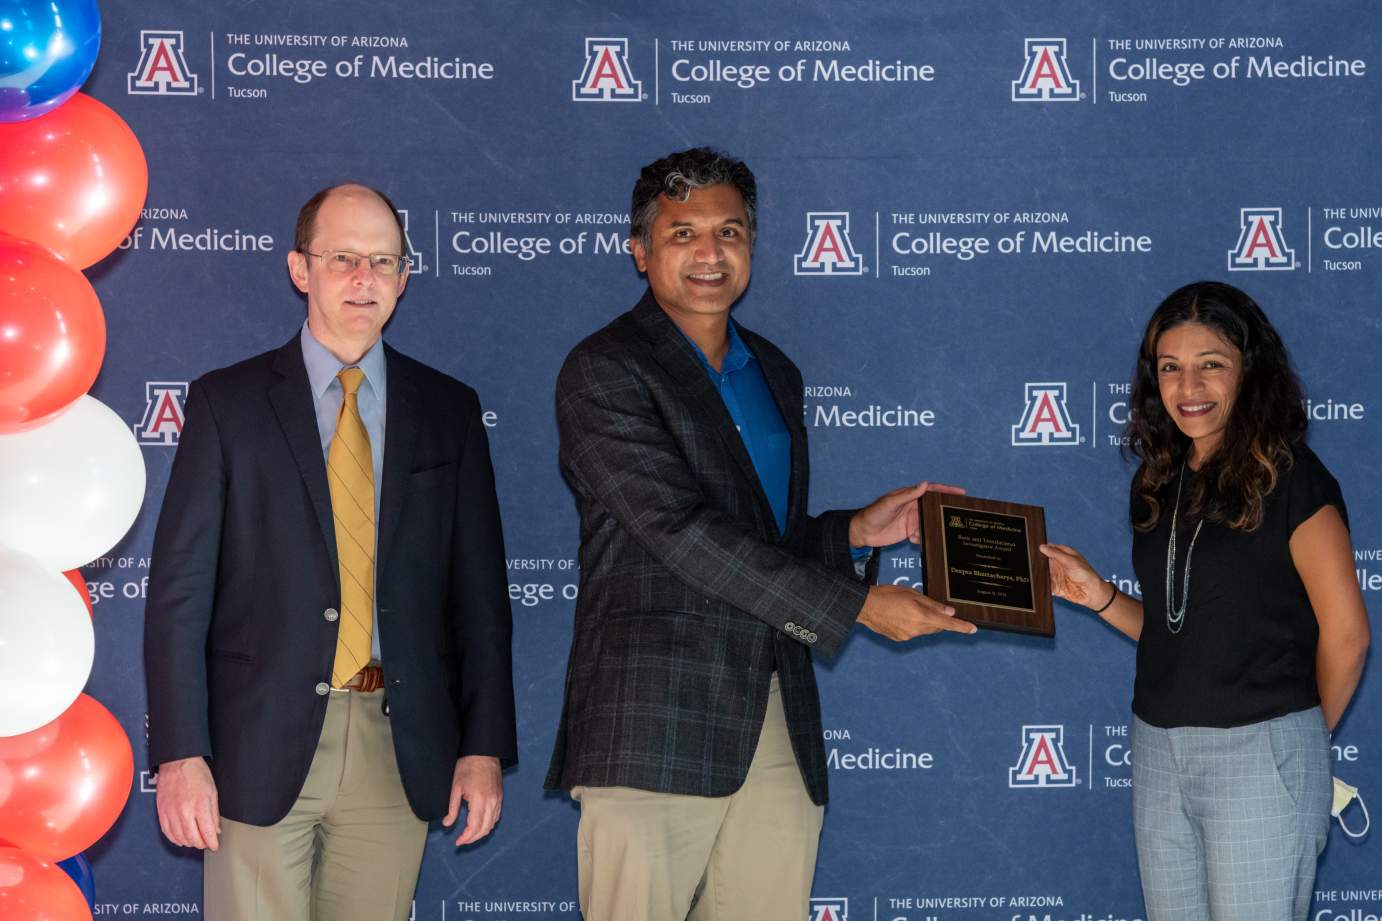 [Dr. Deepta Bhattacharya is presented with the Research Excellence Awards by Dr. Jason Wertheim and Dr. Rachna Shroff.]